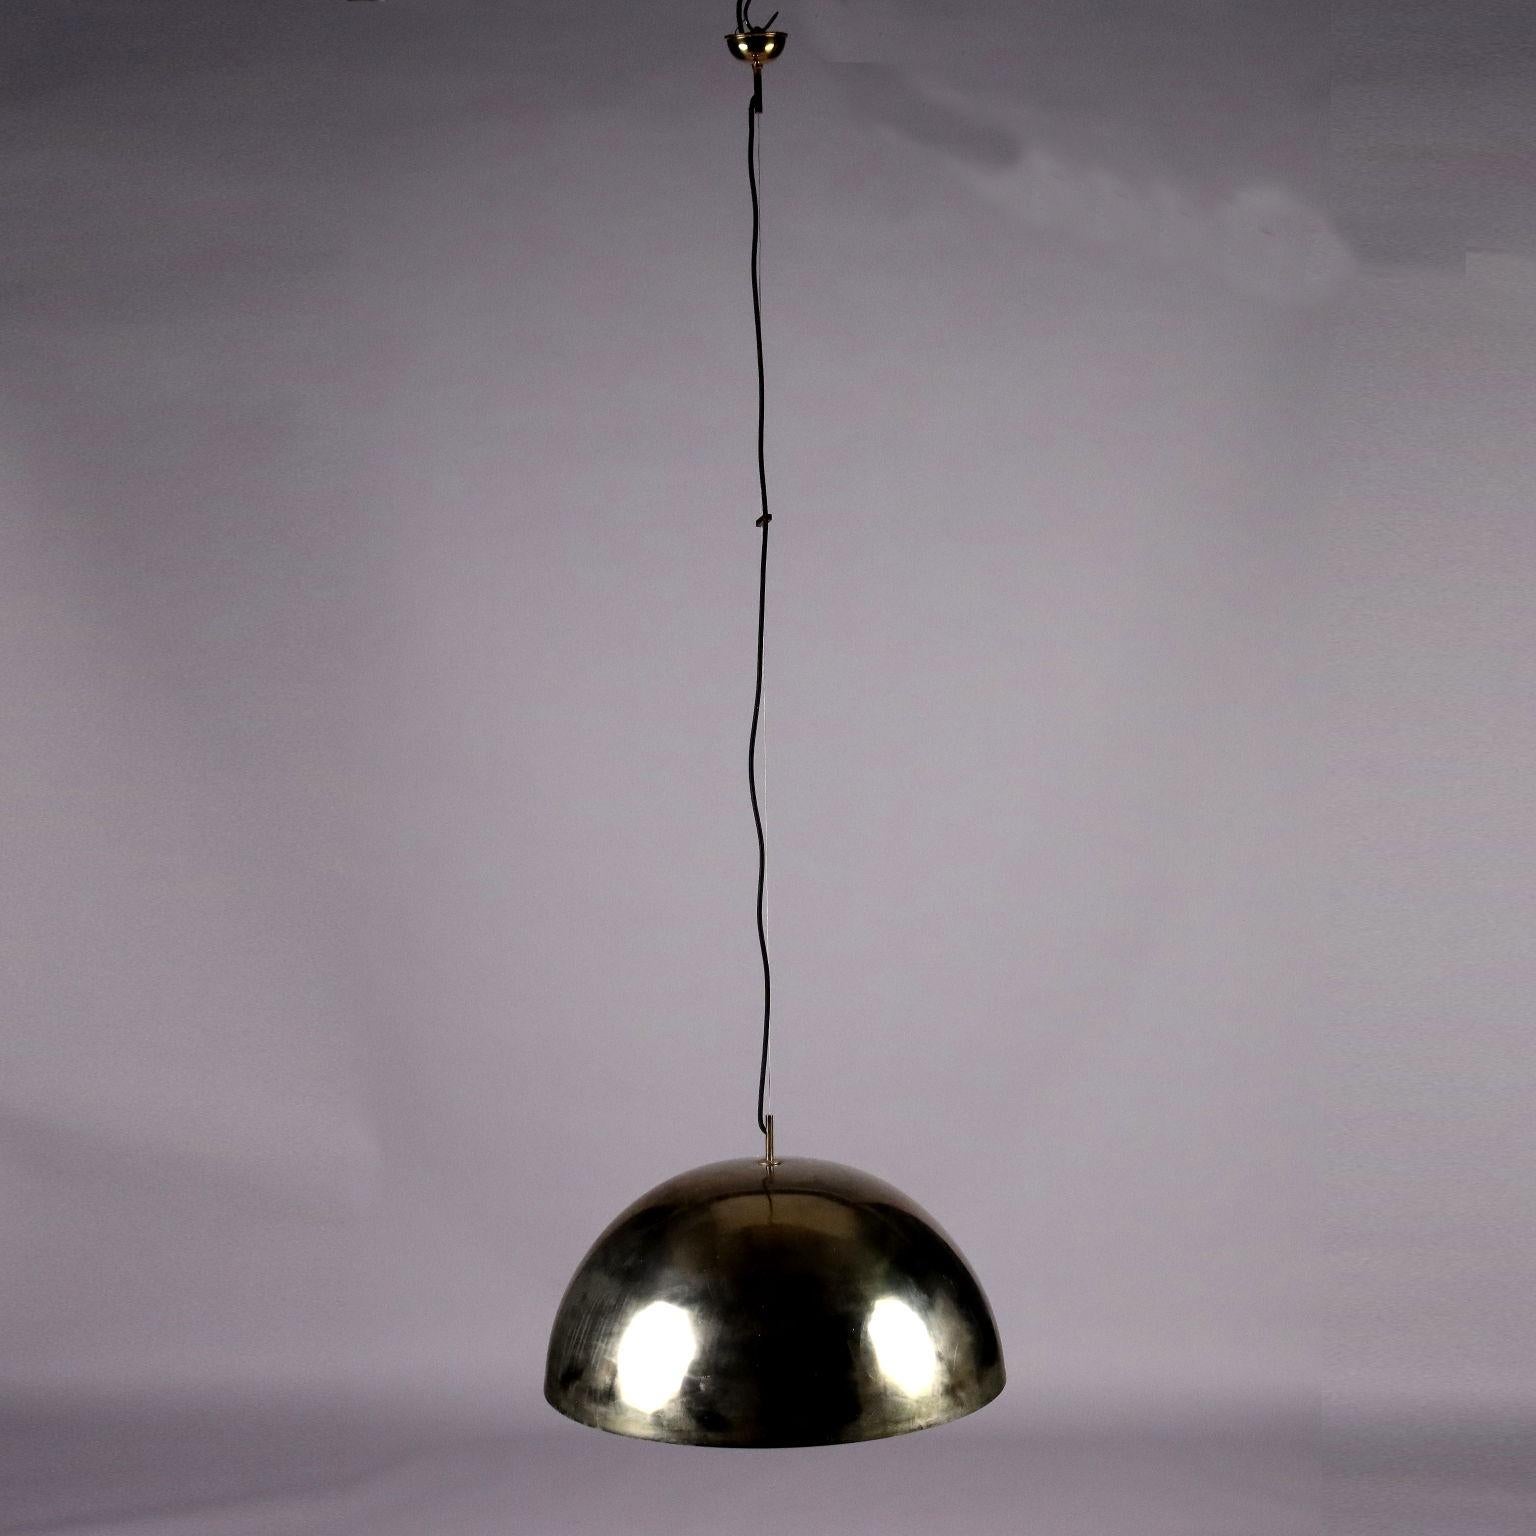 Brass-plated and enameled aluminum ceiling lamp. Good conditions.